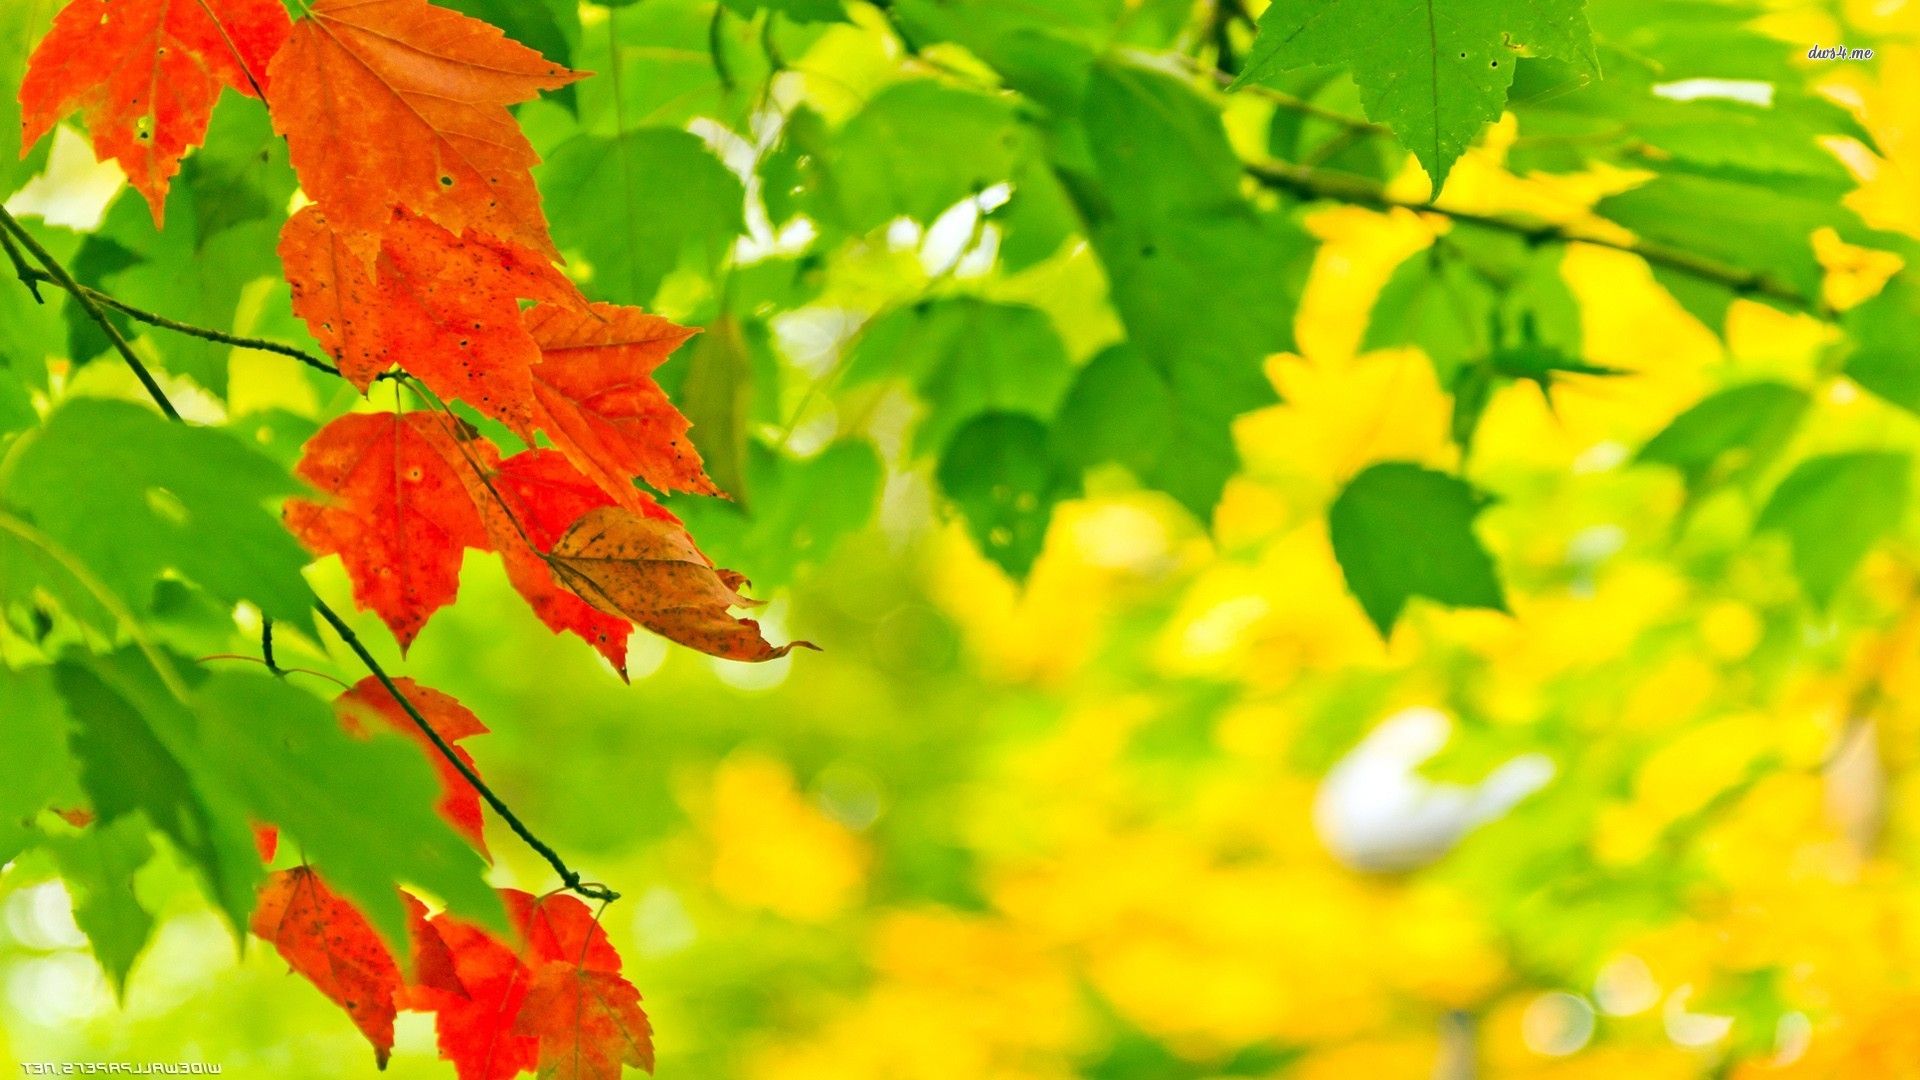 Red and green leaves wallpaper - Photography wallpapers - #12540